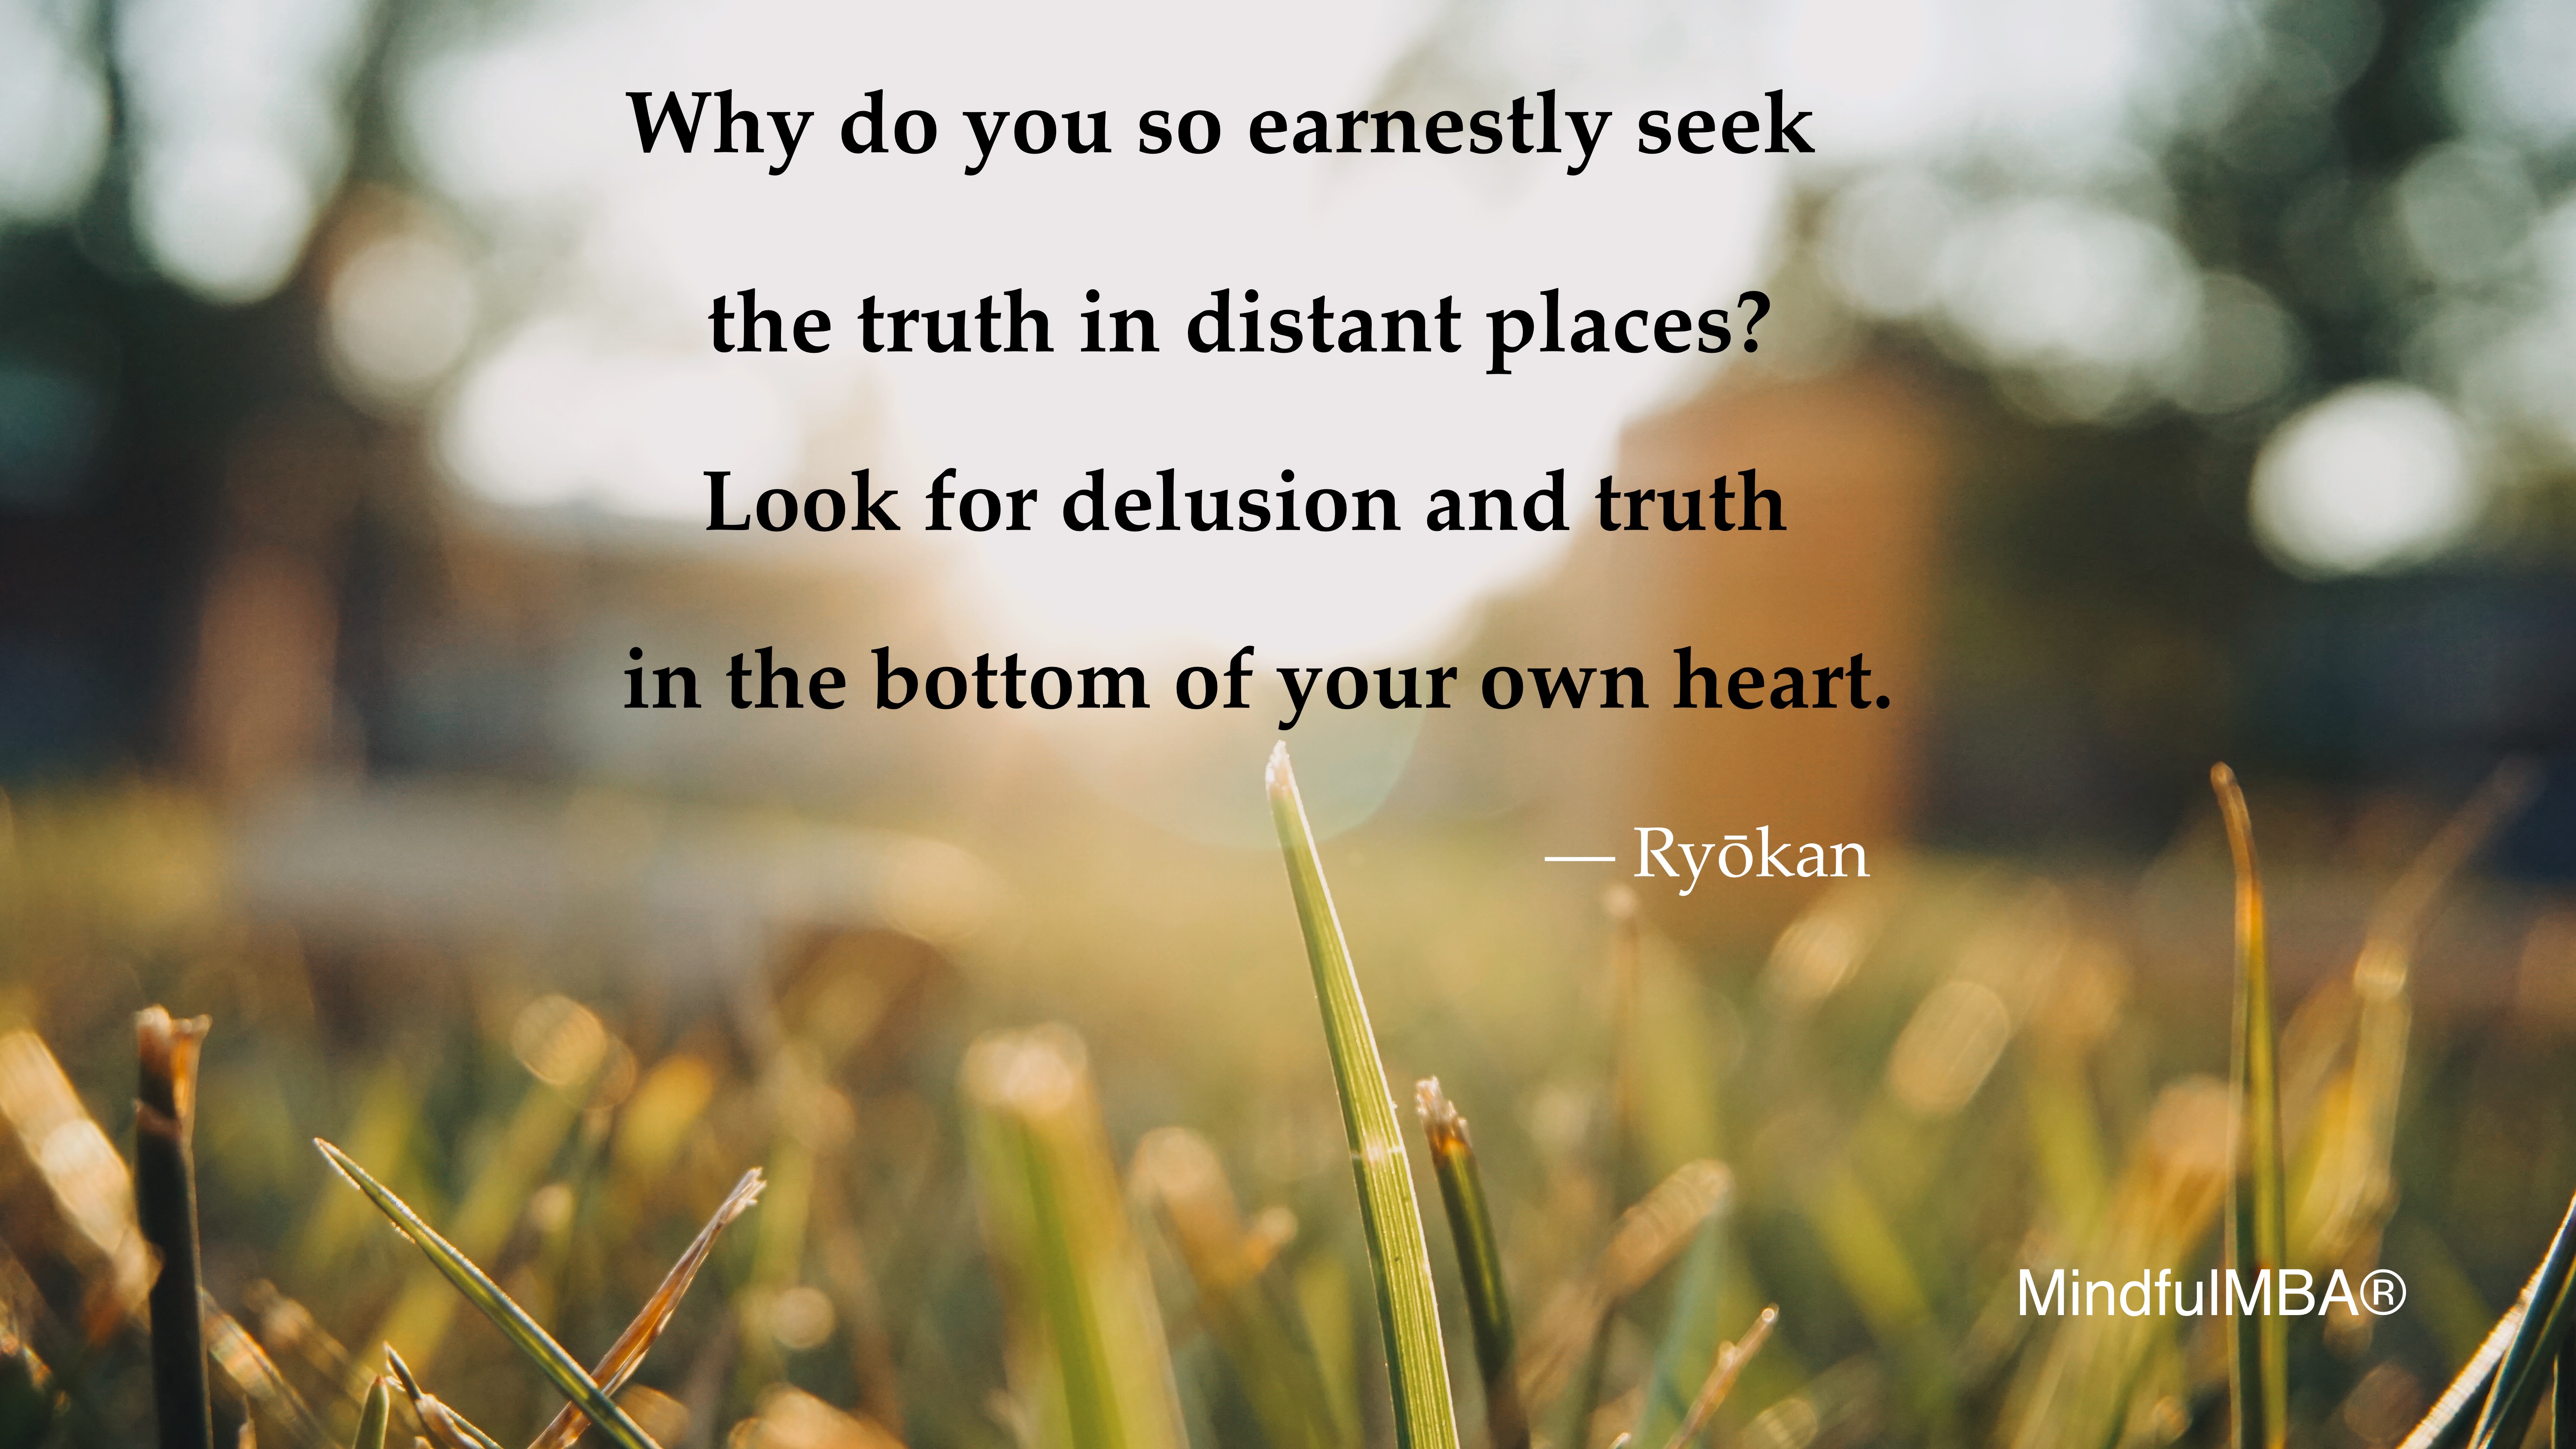 Ryokan truth heart quote w tag